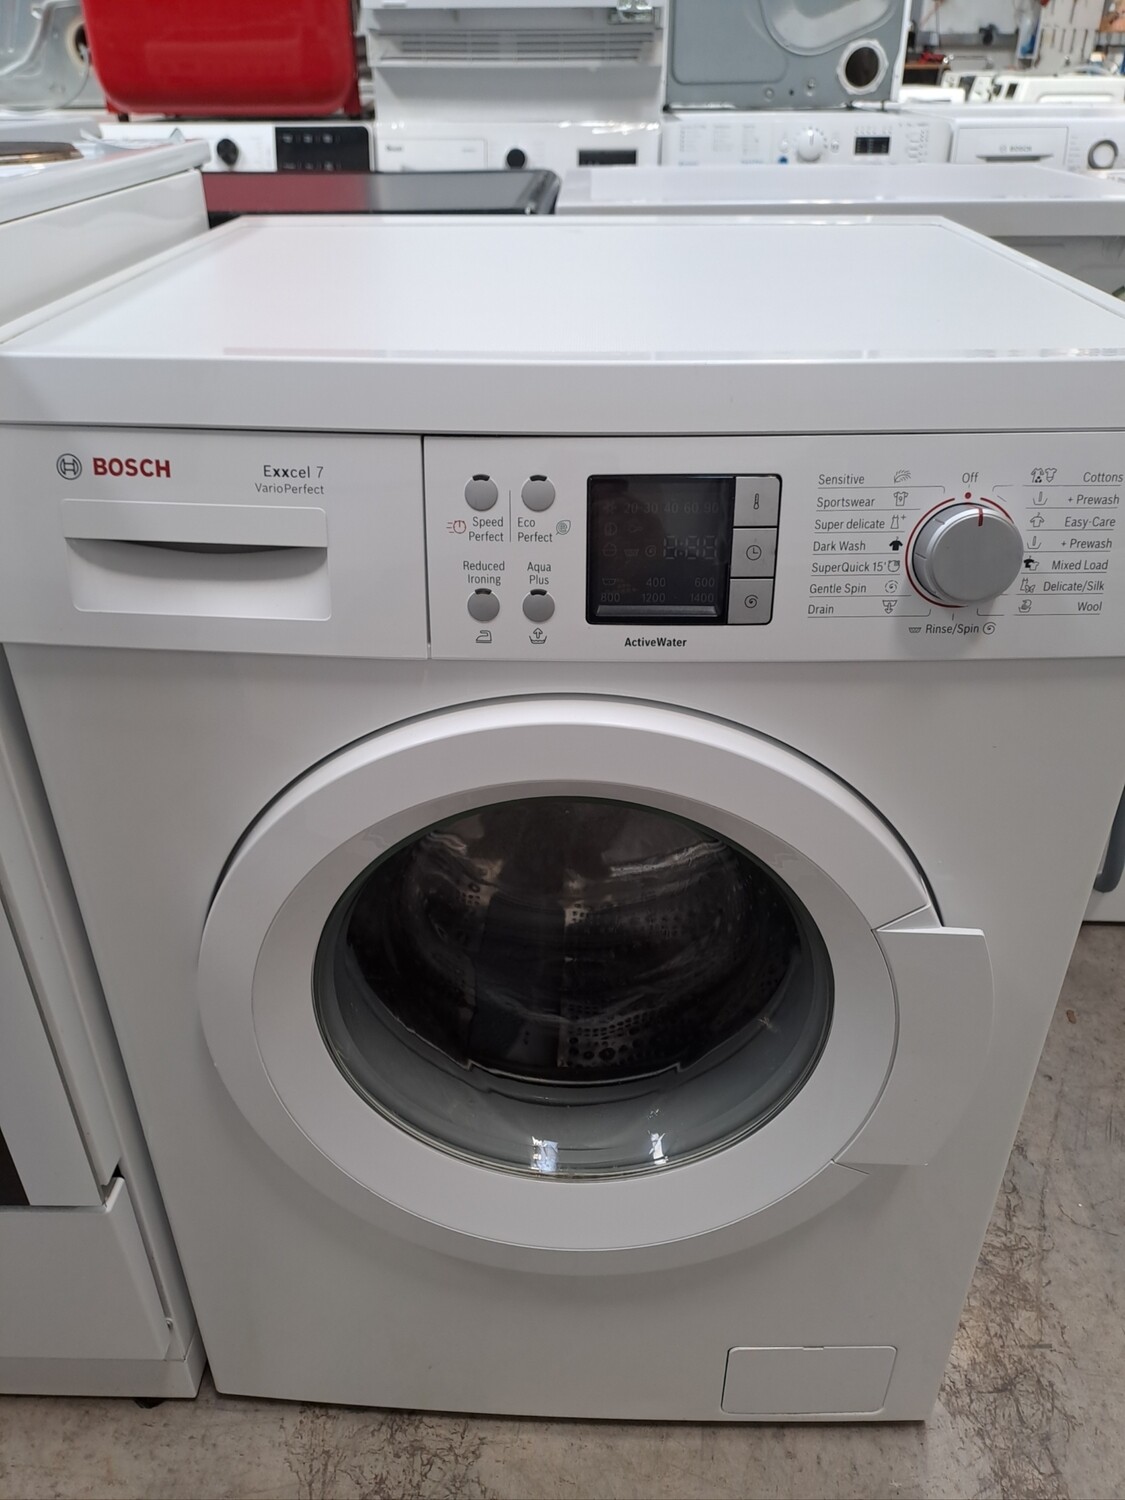 Bosch WAQ28460GB.06 Exxcel 7 Varioperfect 7kg Load 1400 Spin Washing Machine - White - Refurbished - 6 Month Guarantee. This item is located in our Whitby Road Shop 